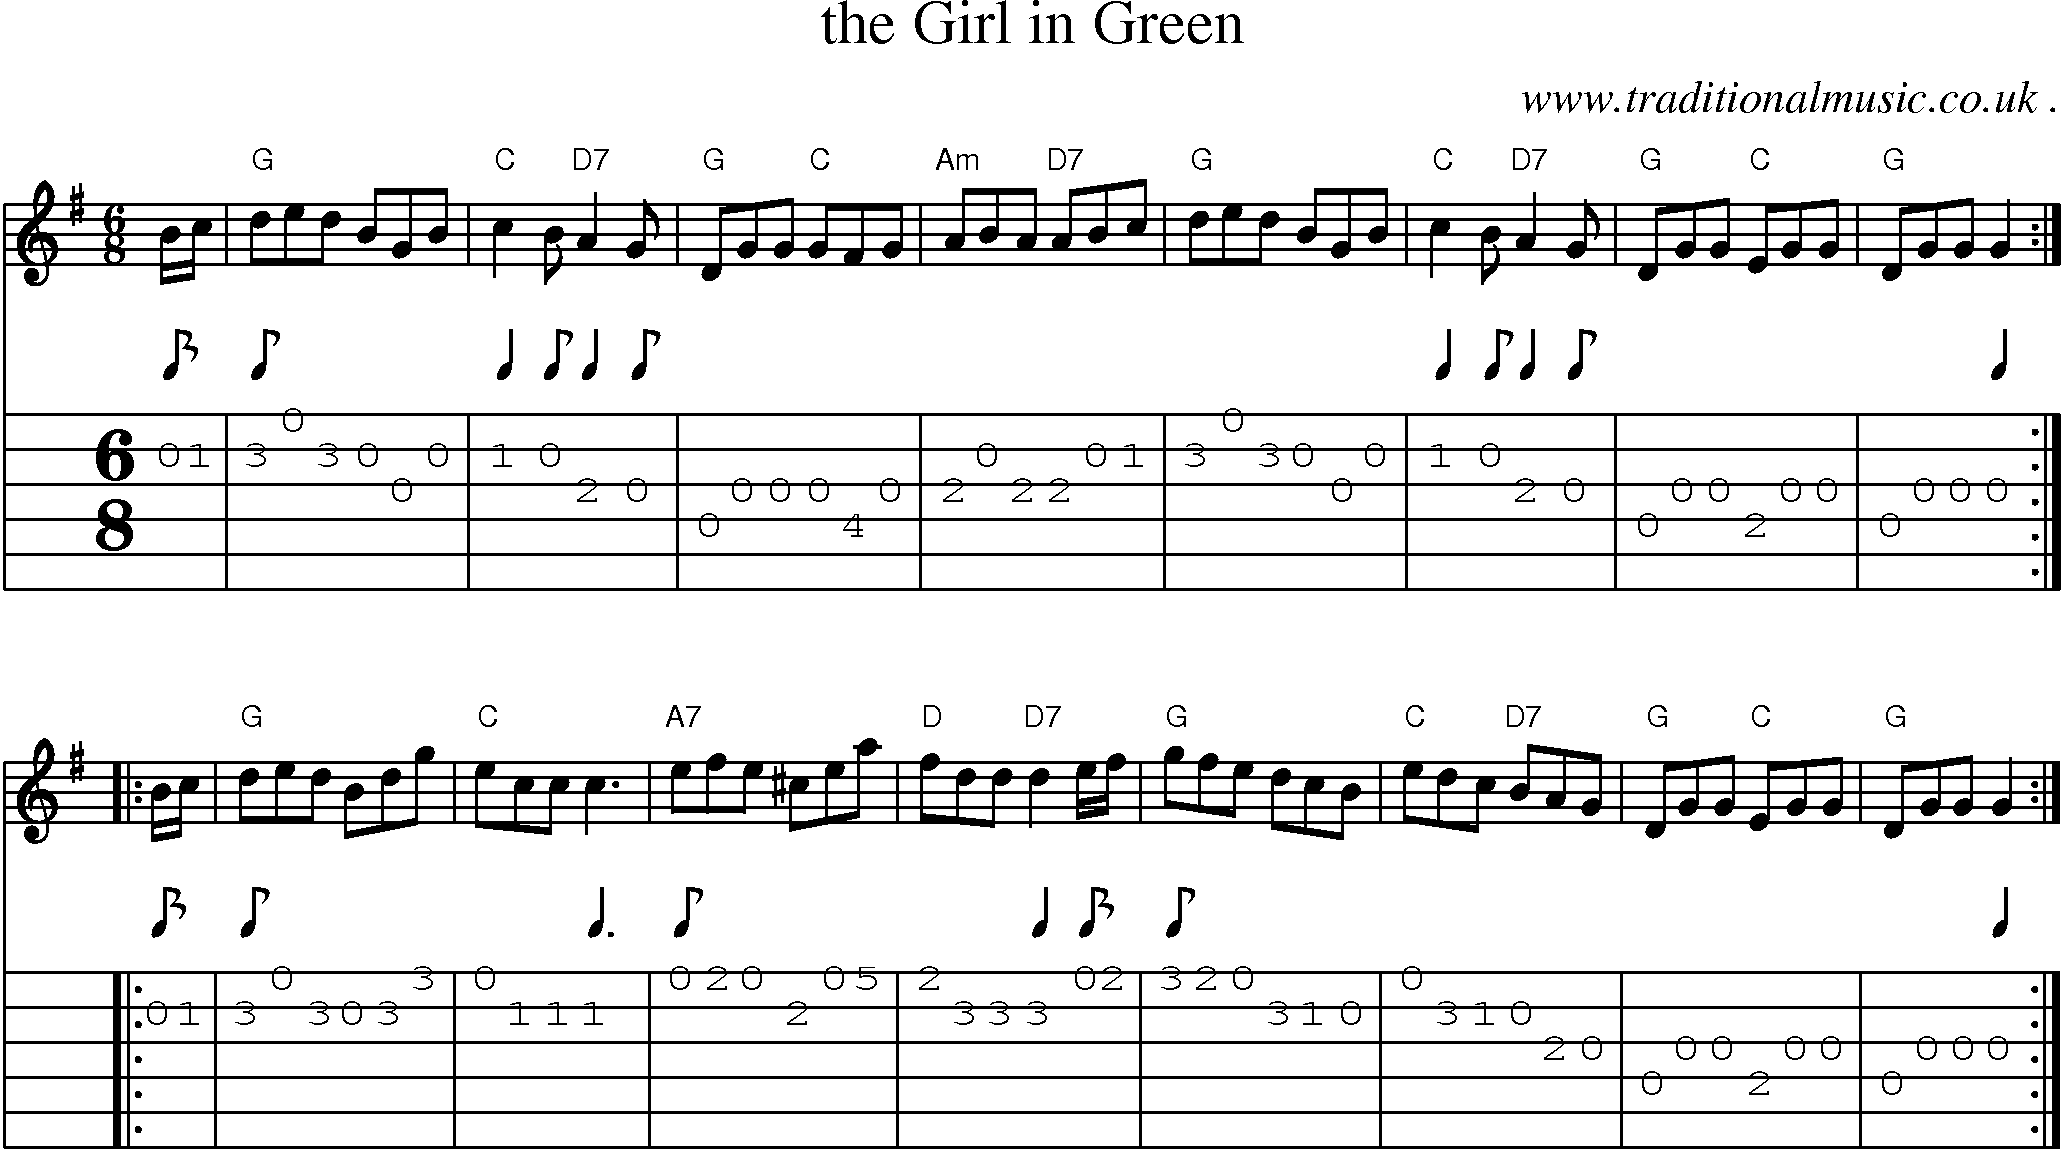 Sheet-music  score, Chords and Guitar Tabs for The Girl In Green